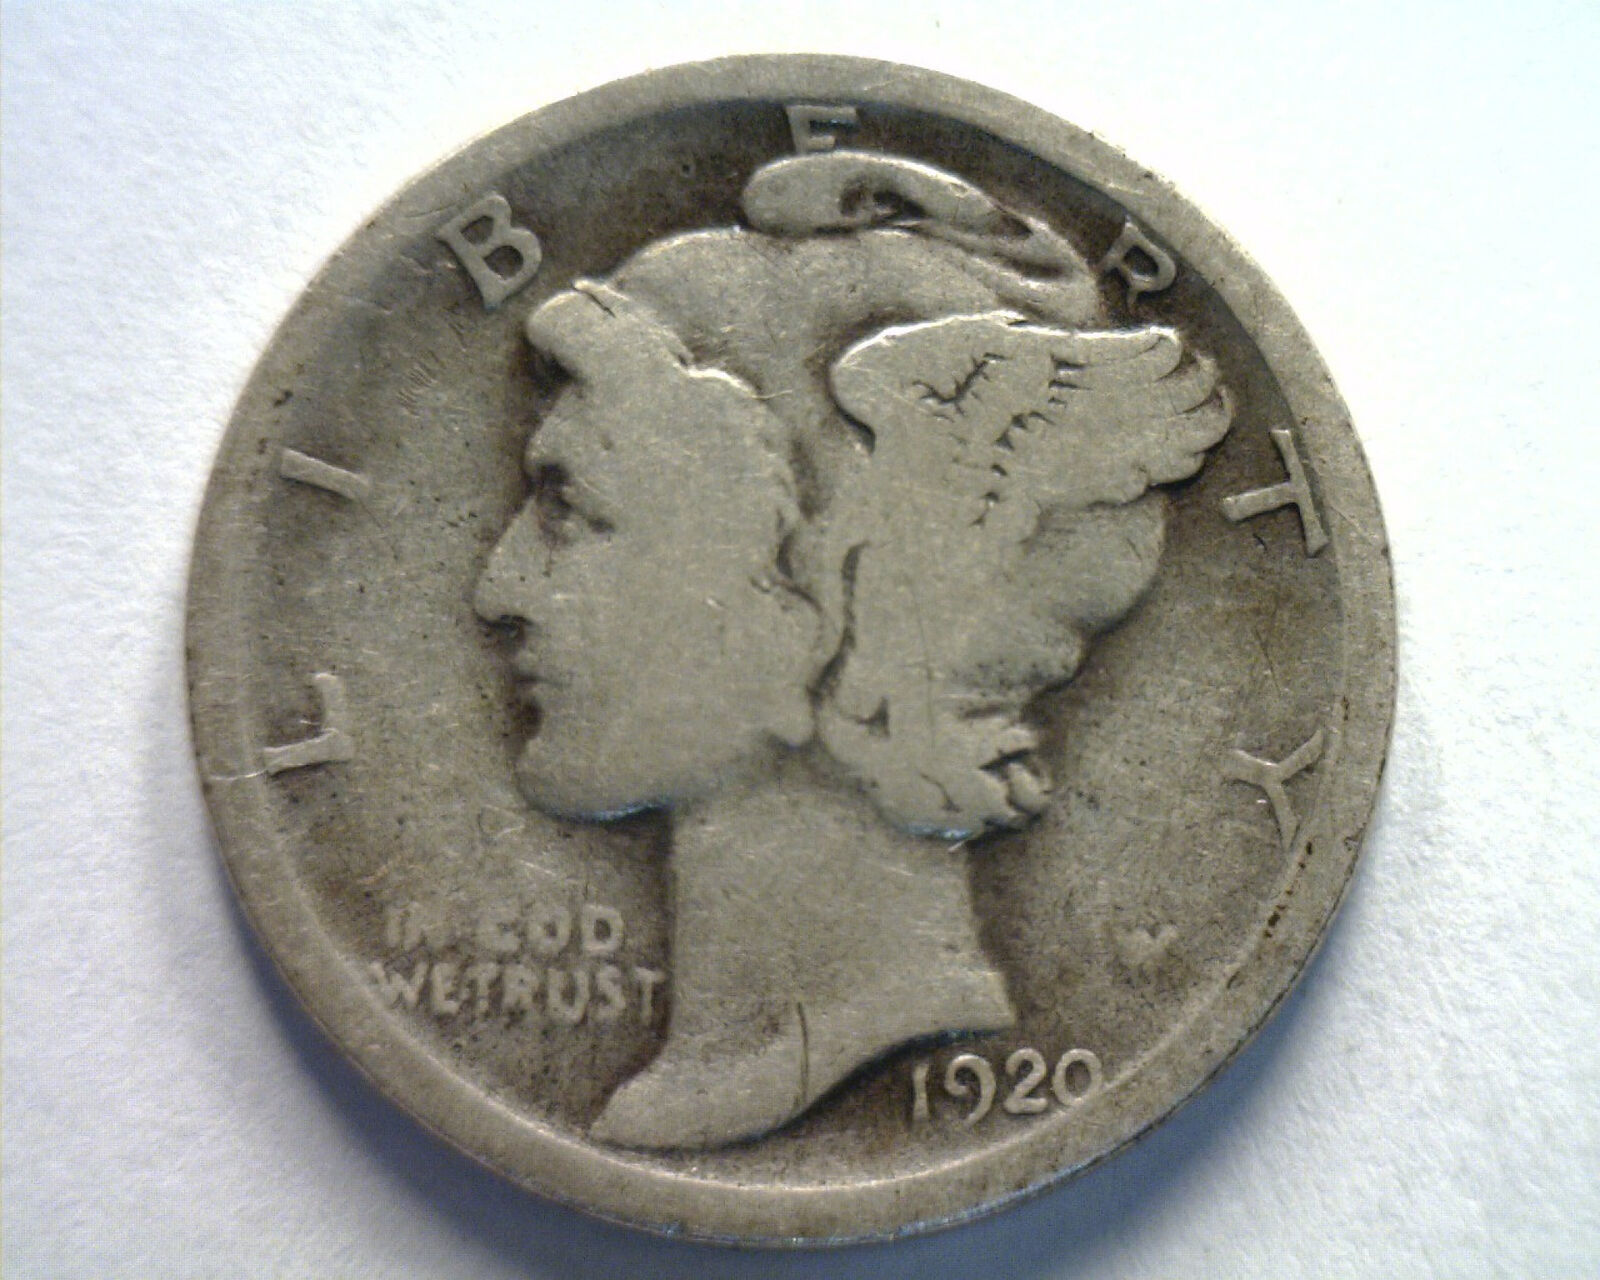 Primary image for 1920 MERCURY DIME VERY GOOD VG NICE ORIGINAL COIN FROM BOBS COINS FAST SHIPMENT